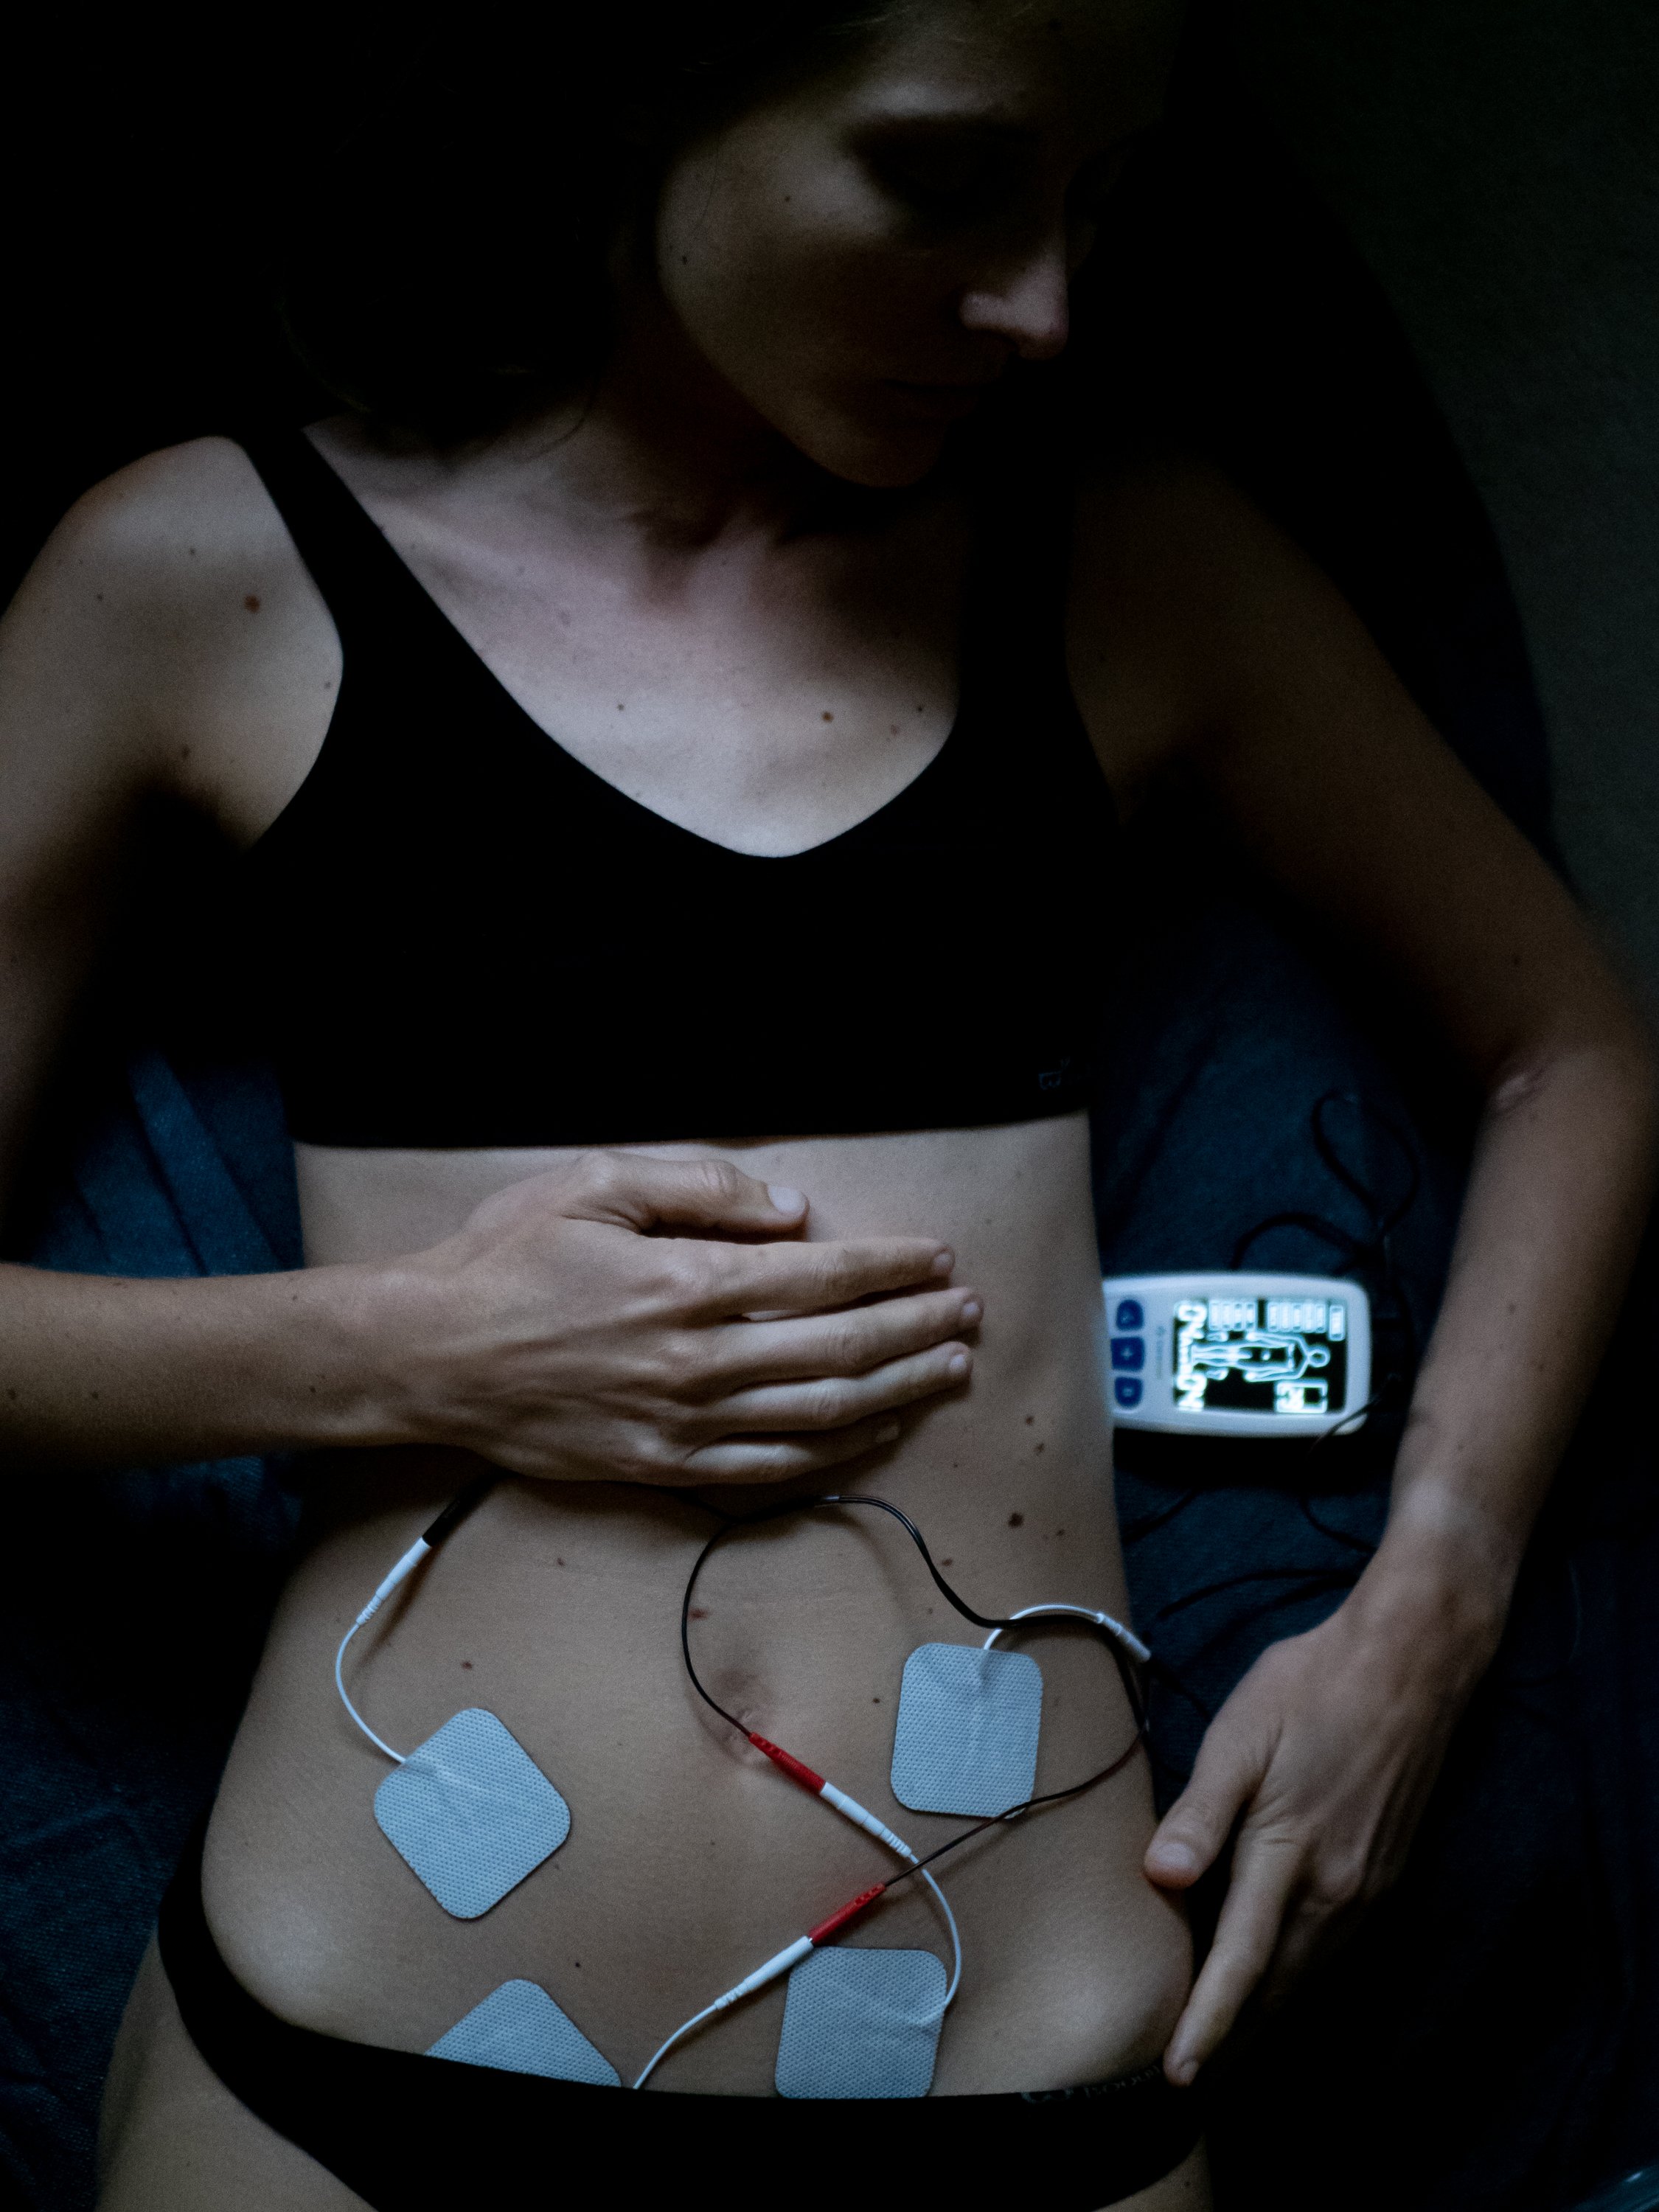  Transcutaneous electrical nerve stimulation (TENS) is a method of pain relief involving the use of a mild electrical current. The electrical impulses can reduce the pain signals going to the spinal cord and brain, which may help relieve pain and rel